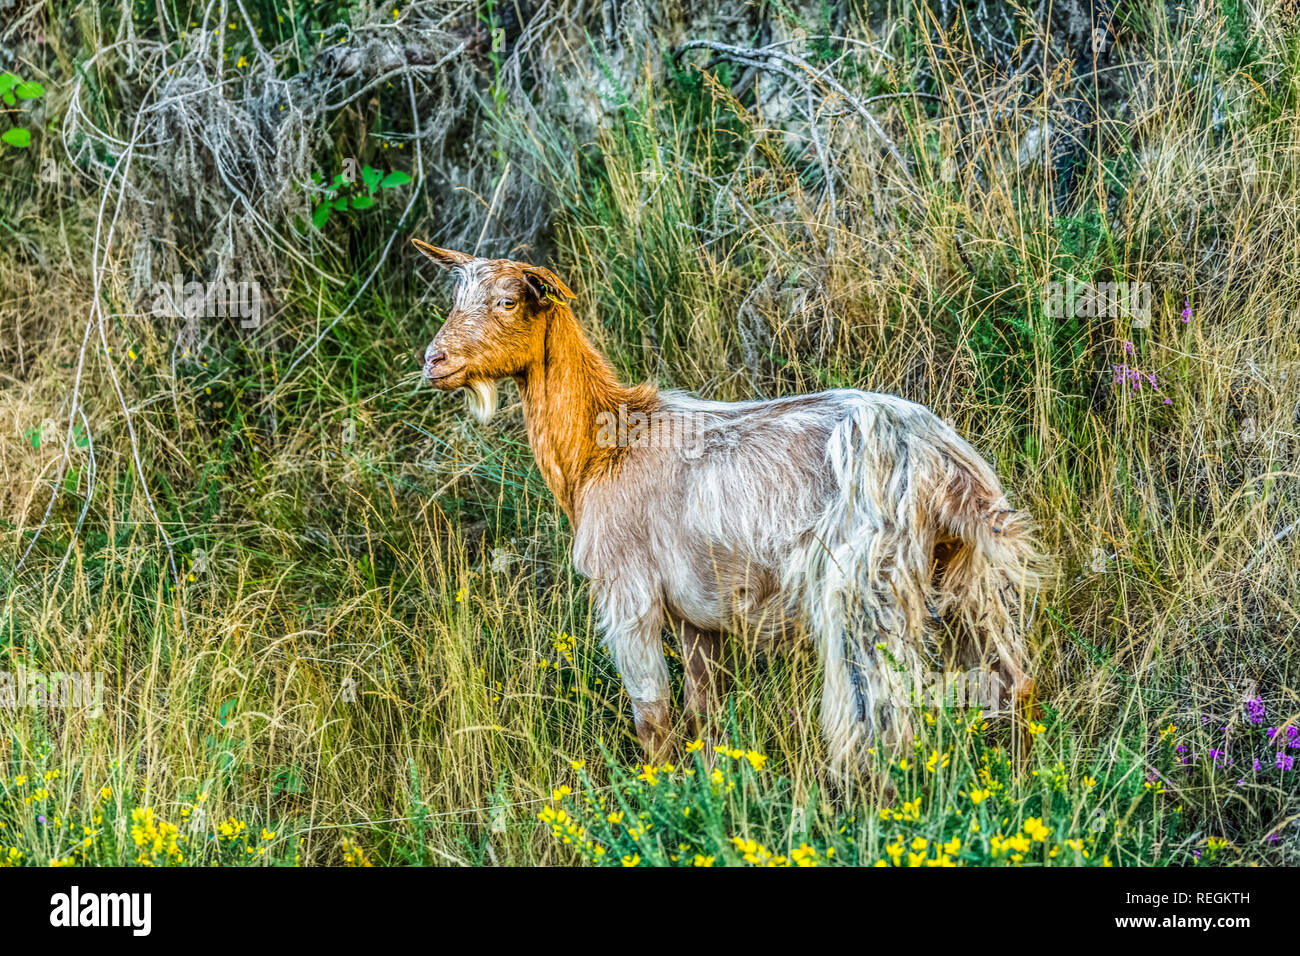 View of a goat eating herbs in the mountain... Stock Photo